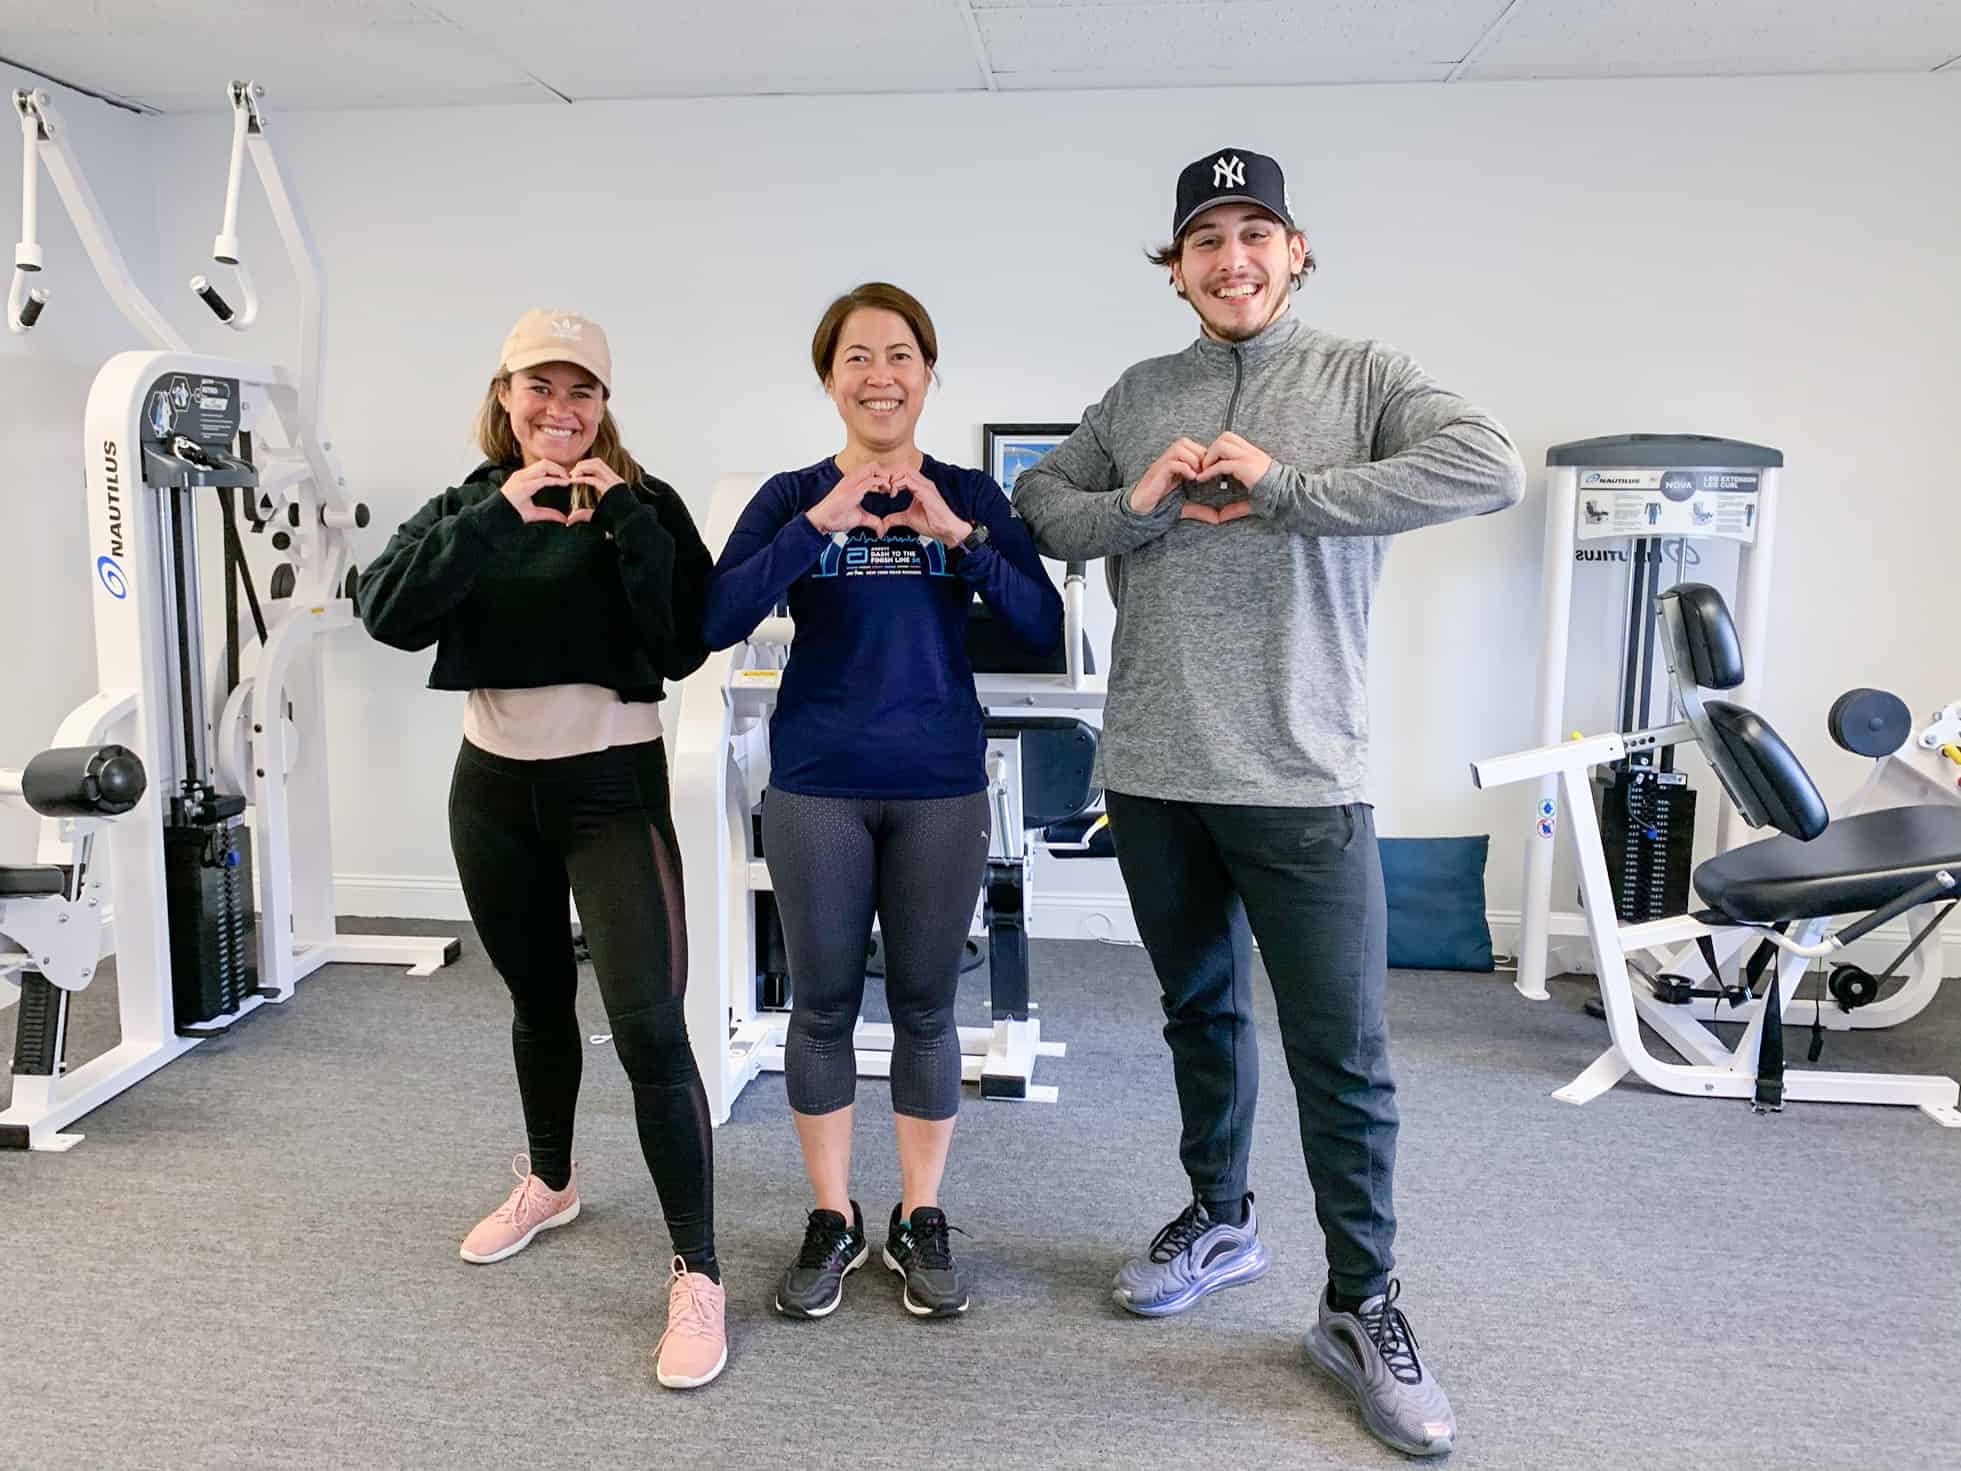 3 Loyalty Fitness trainers in front of equipment with hands in shape of heart